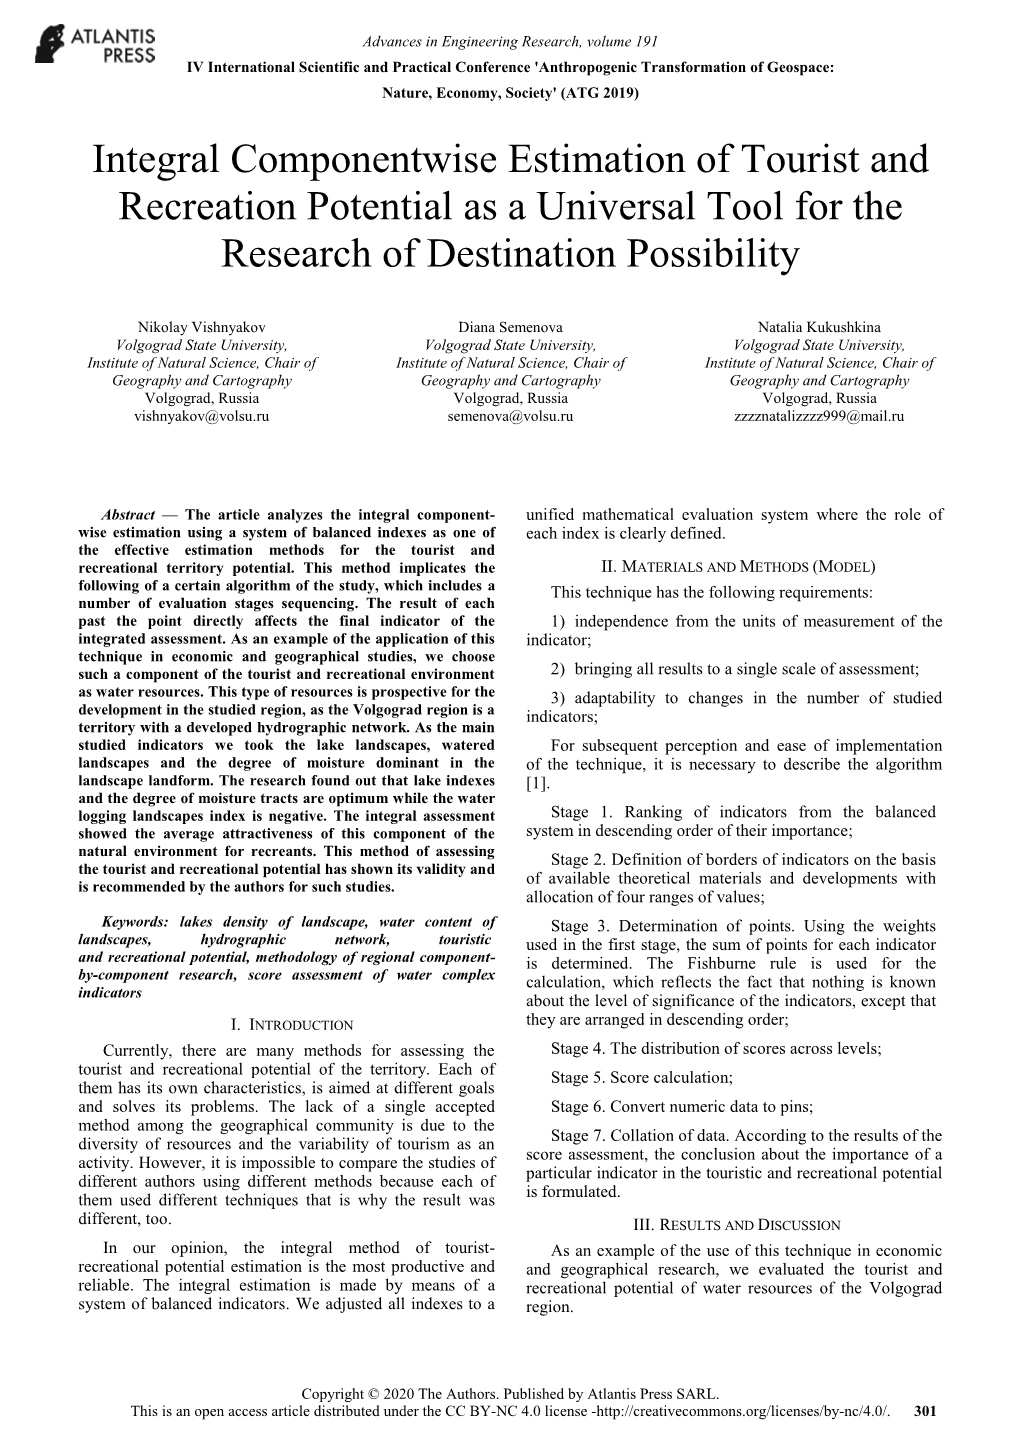 Integral Componentwise Estimation of Tourist and Recreation Potential As a Universal Tool for the Research of Destination Possibility